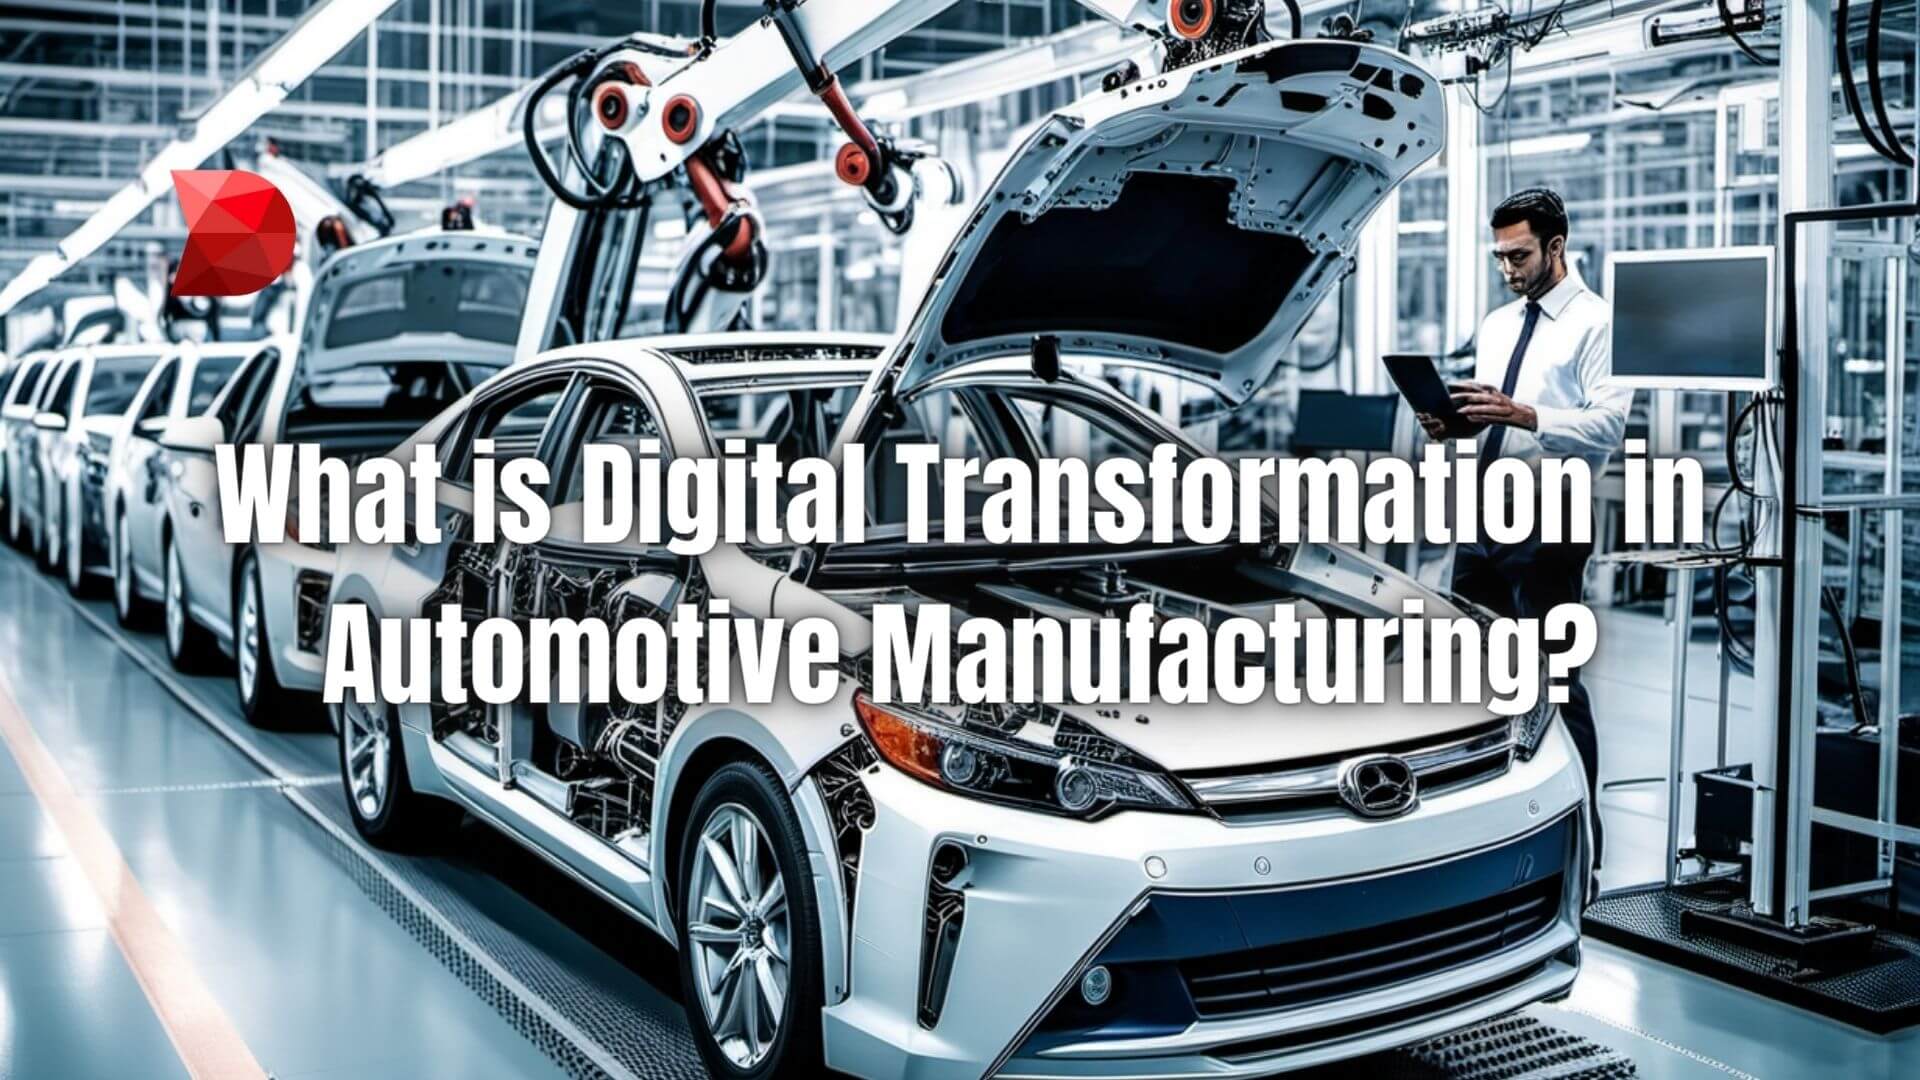 Navigate the future of the industry efficiently! Click here to discover the essence of digital transformation in automotive manufacturing.